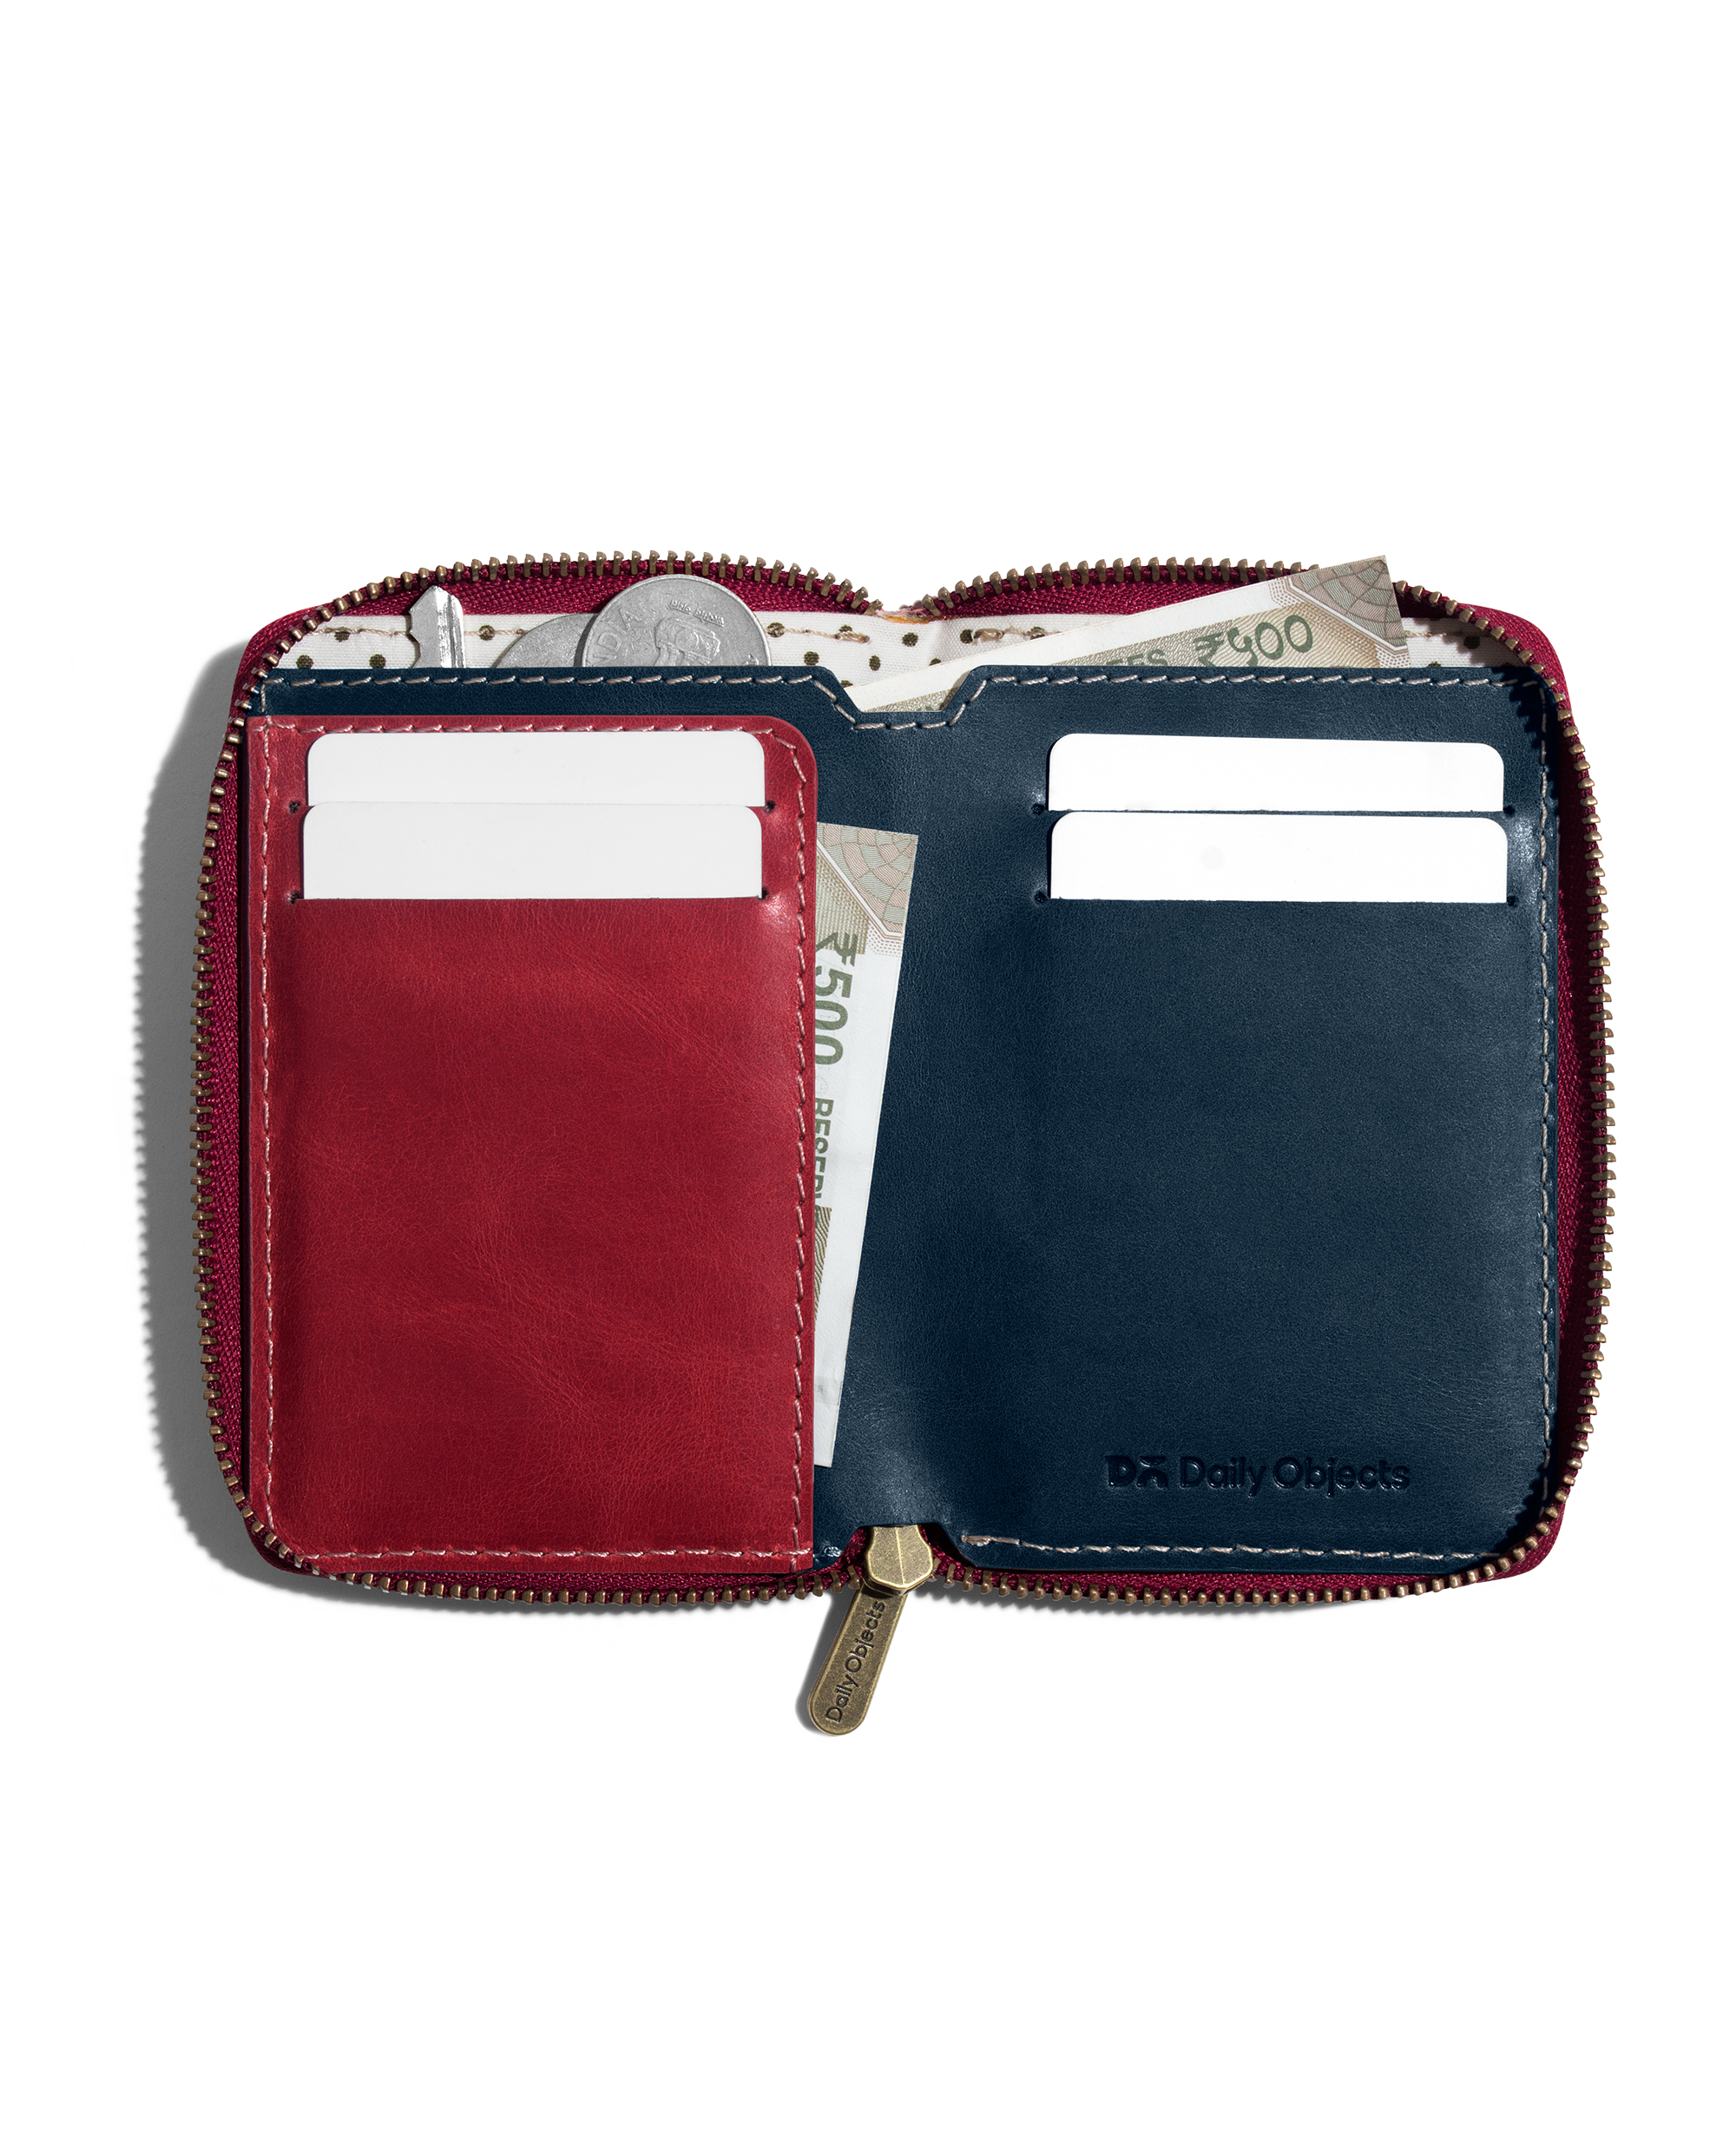 DailyObjects Scarlet Red Zip-Around Leather Wallet Buy At DailyObjects